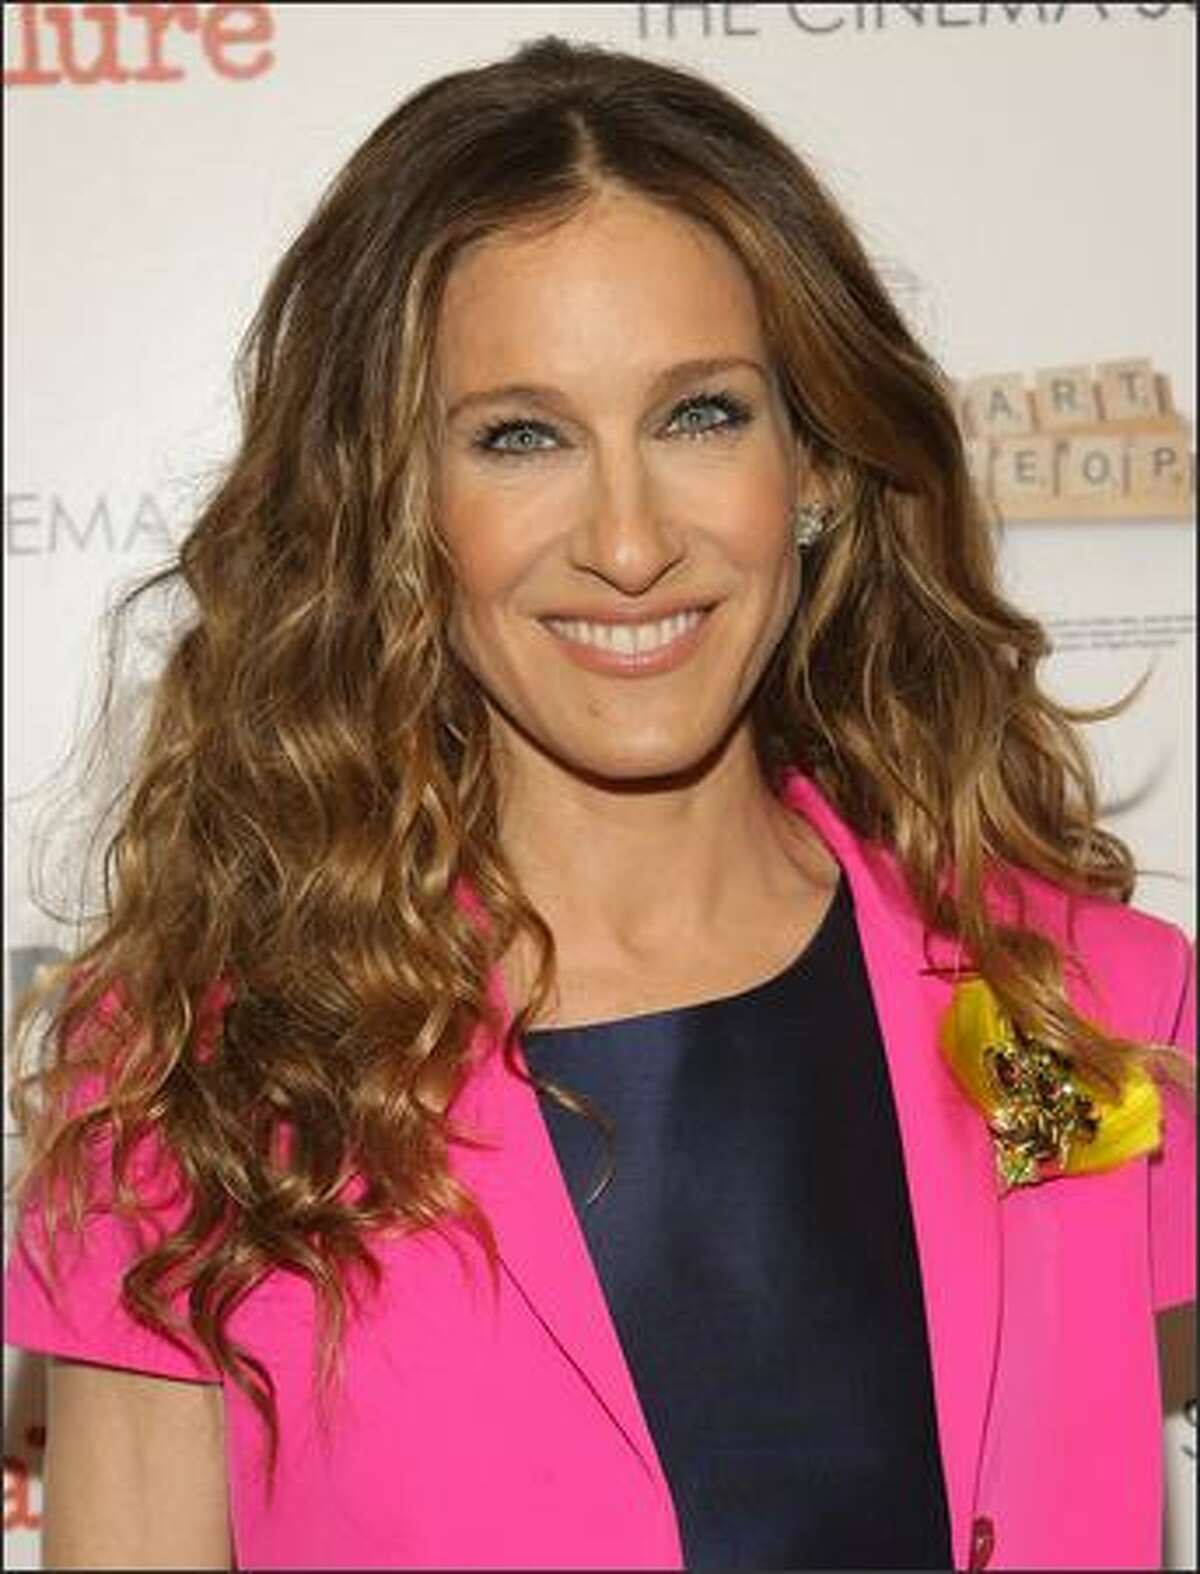 Actress Sarah Jessica Parker attends "Smart People" screening hosted by the Cinema Society & Linda Wells at the Landmark Sunshine Theater on Monday in New York City.